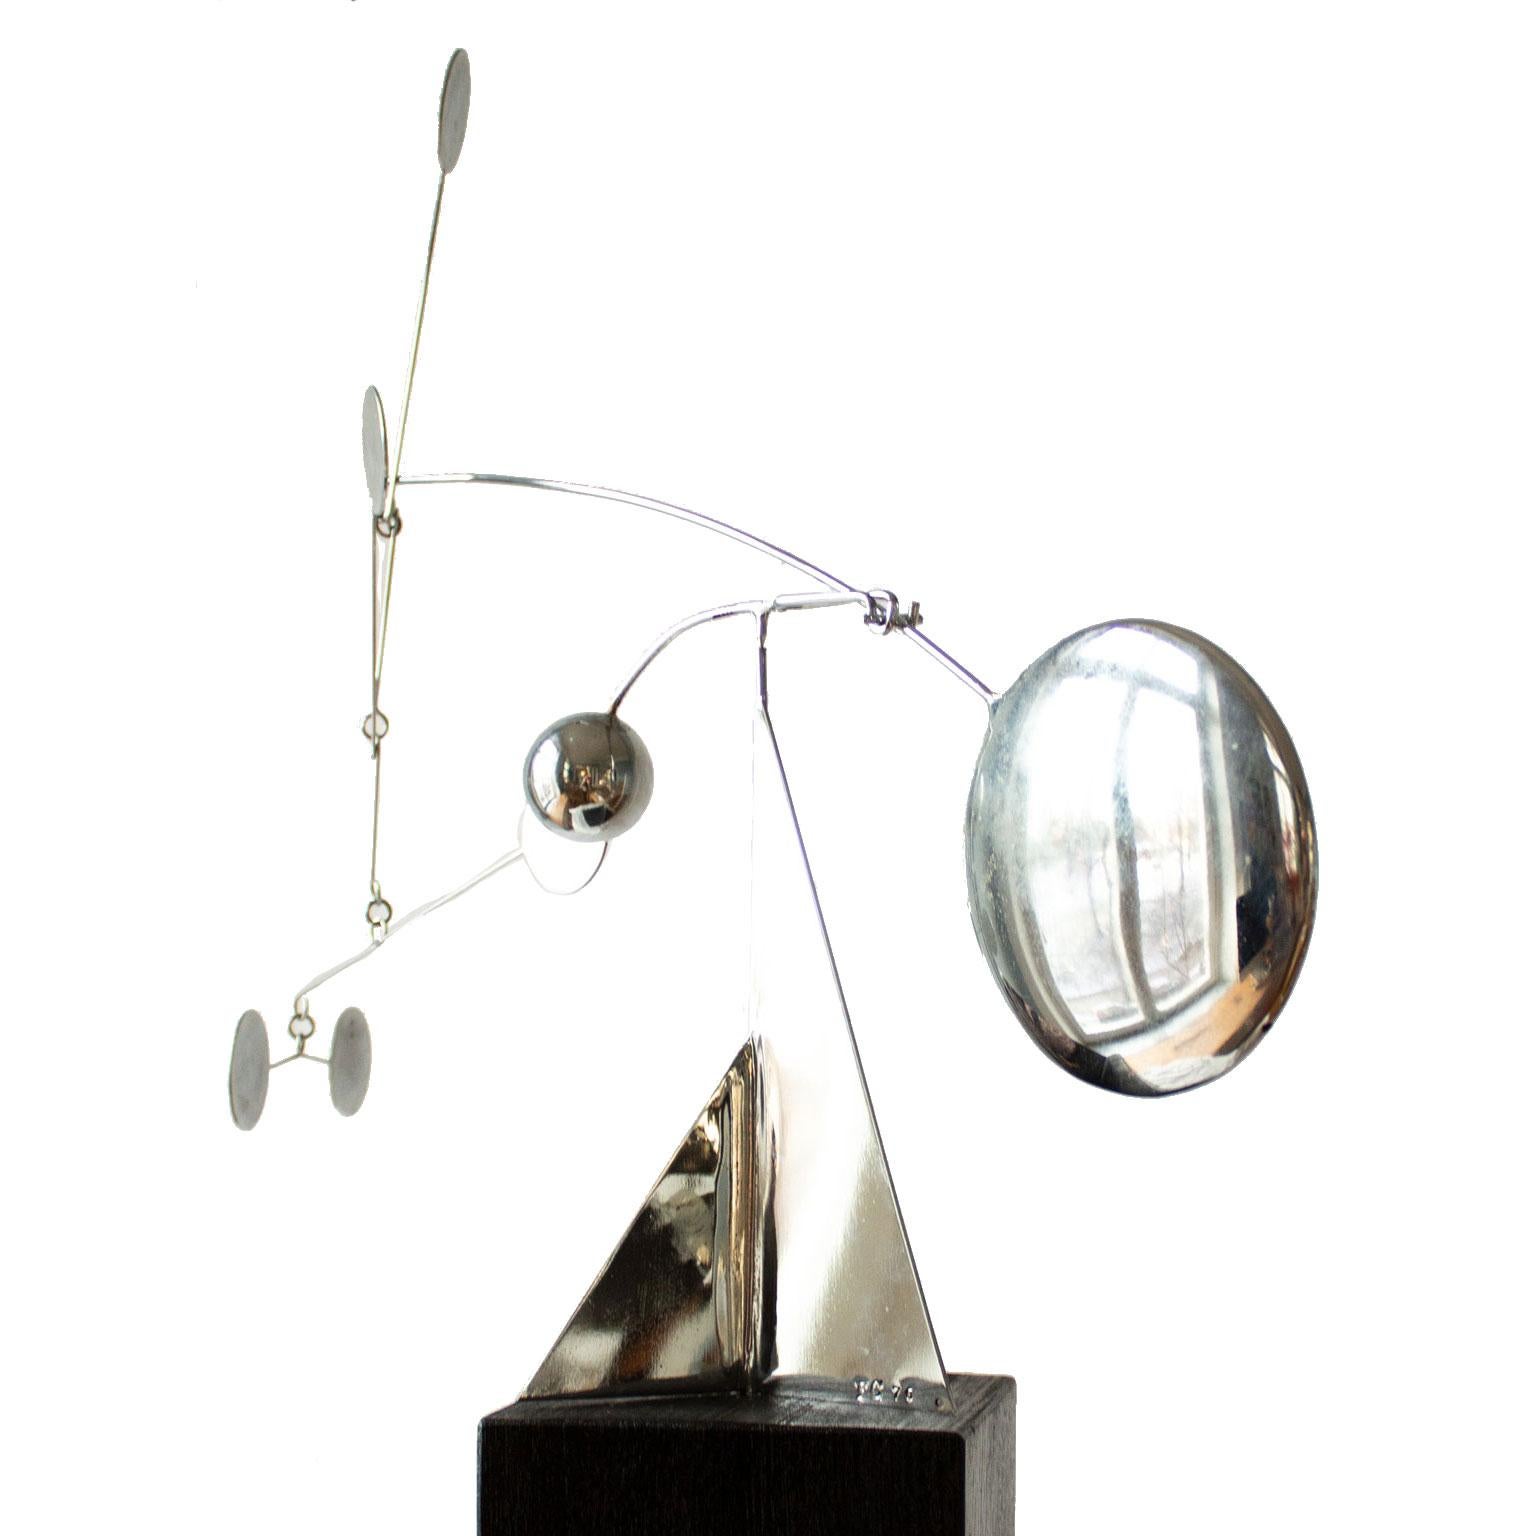 Kinetic Stabile Mobile Sculpture Signed by Francois Collette from 1976